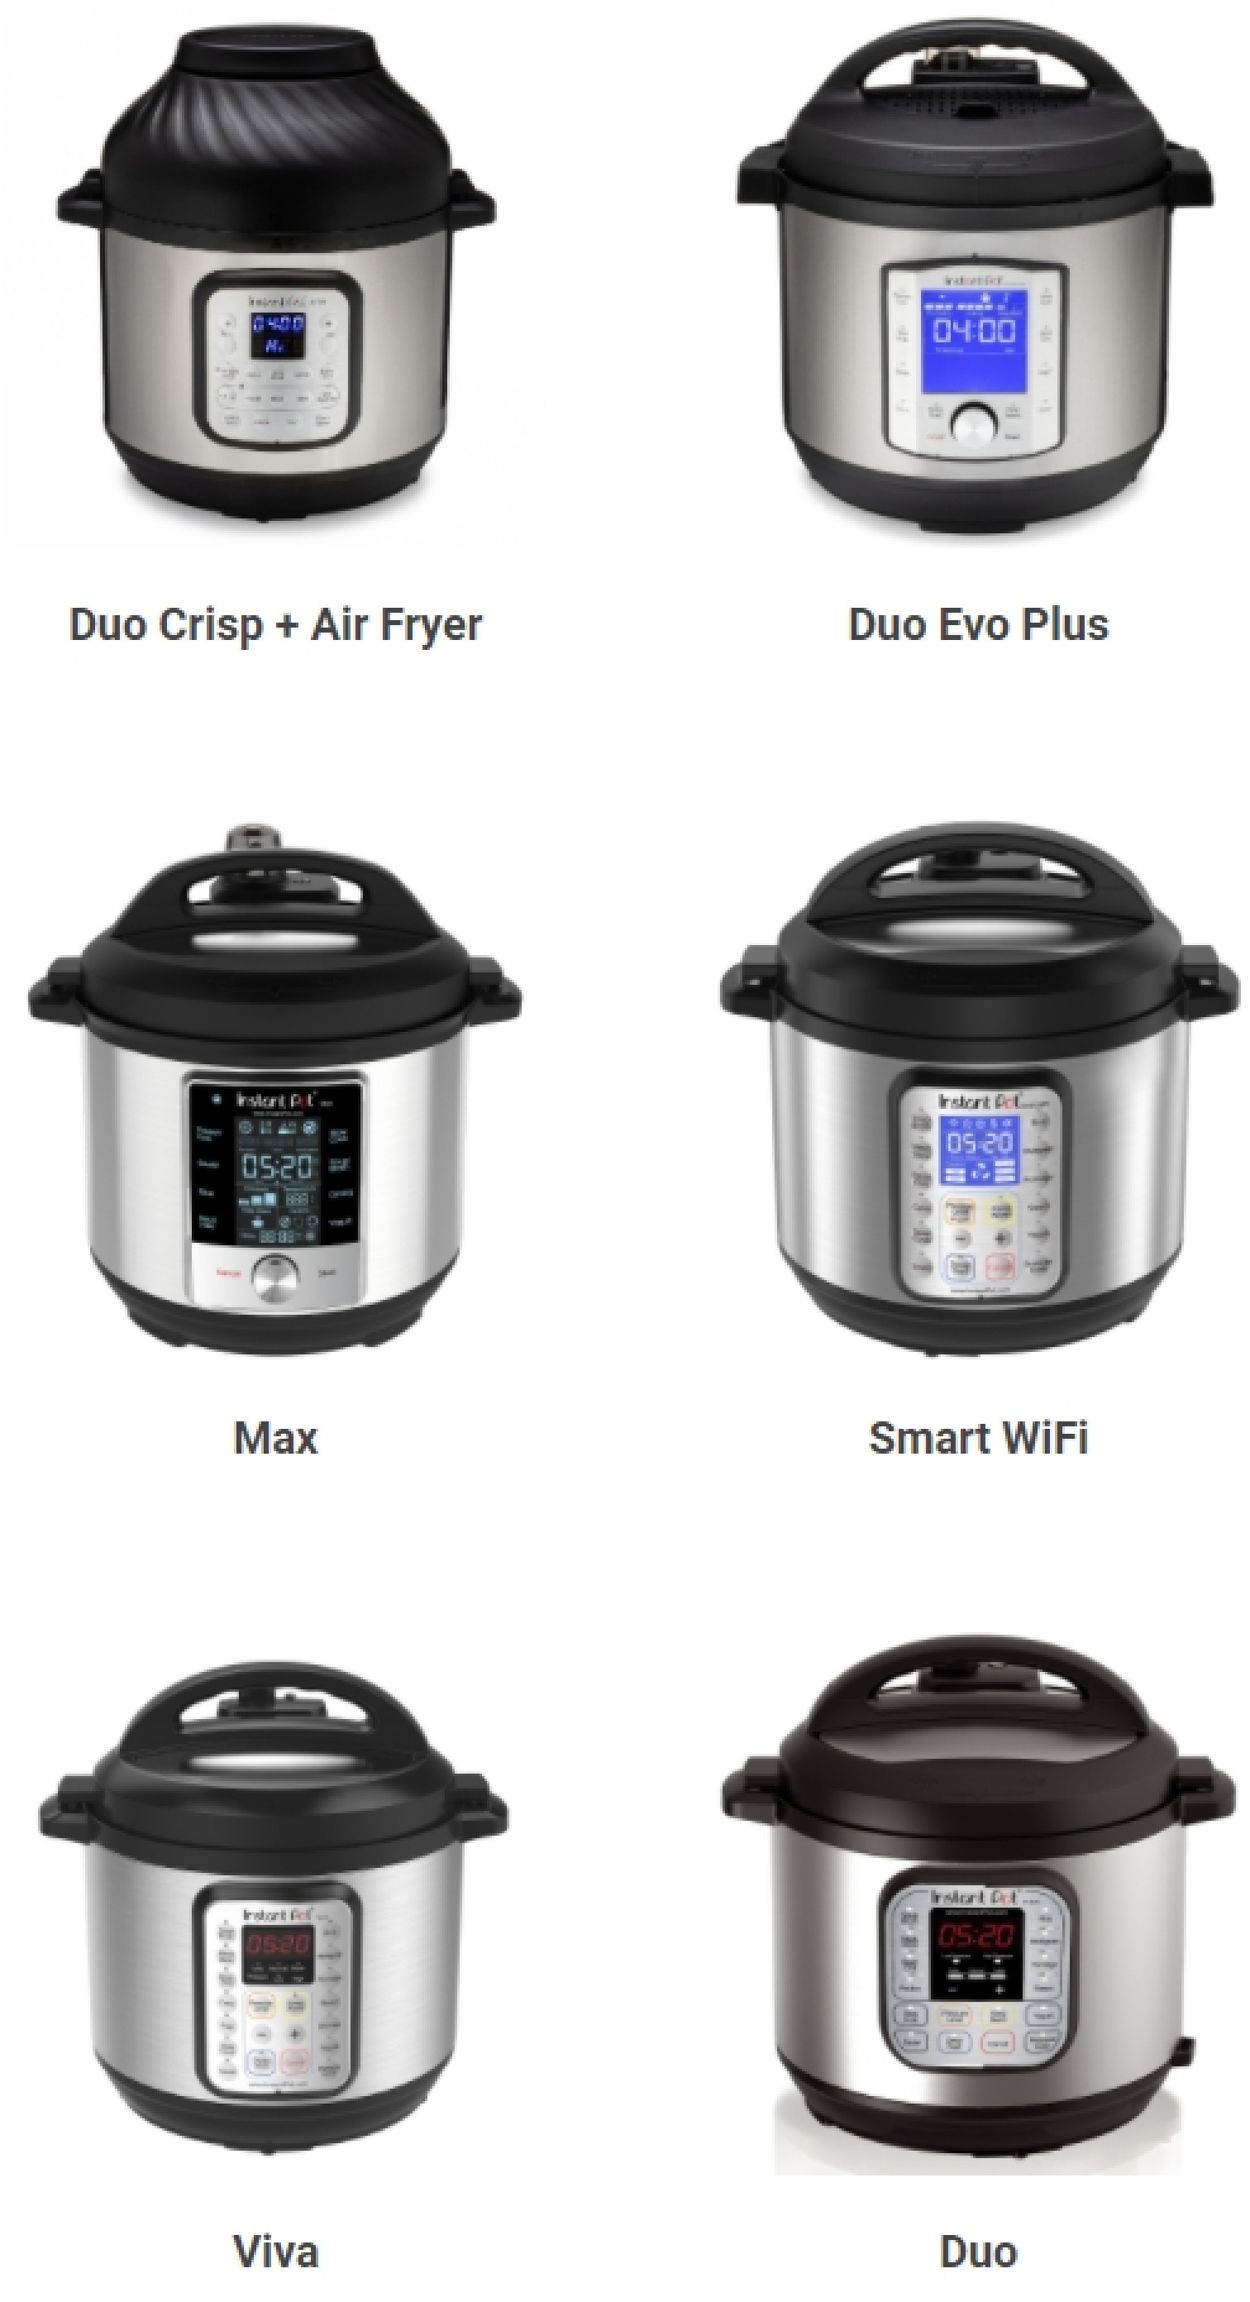 Instant Pot Ad from 11/14/2020